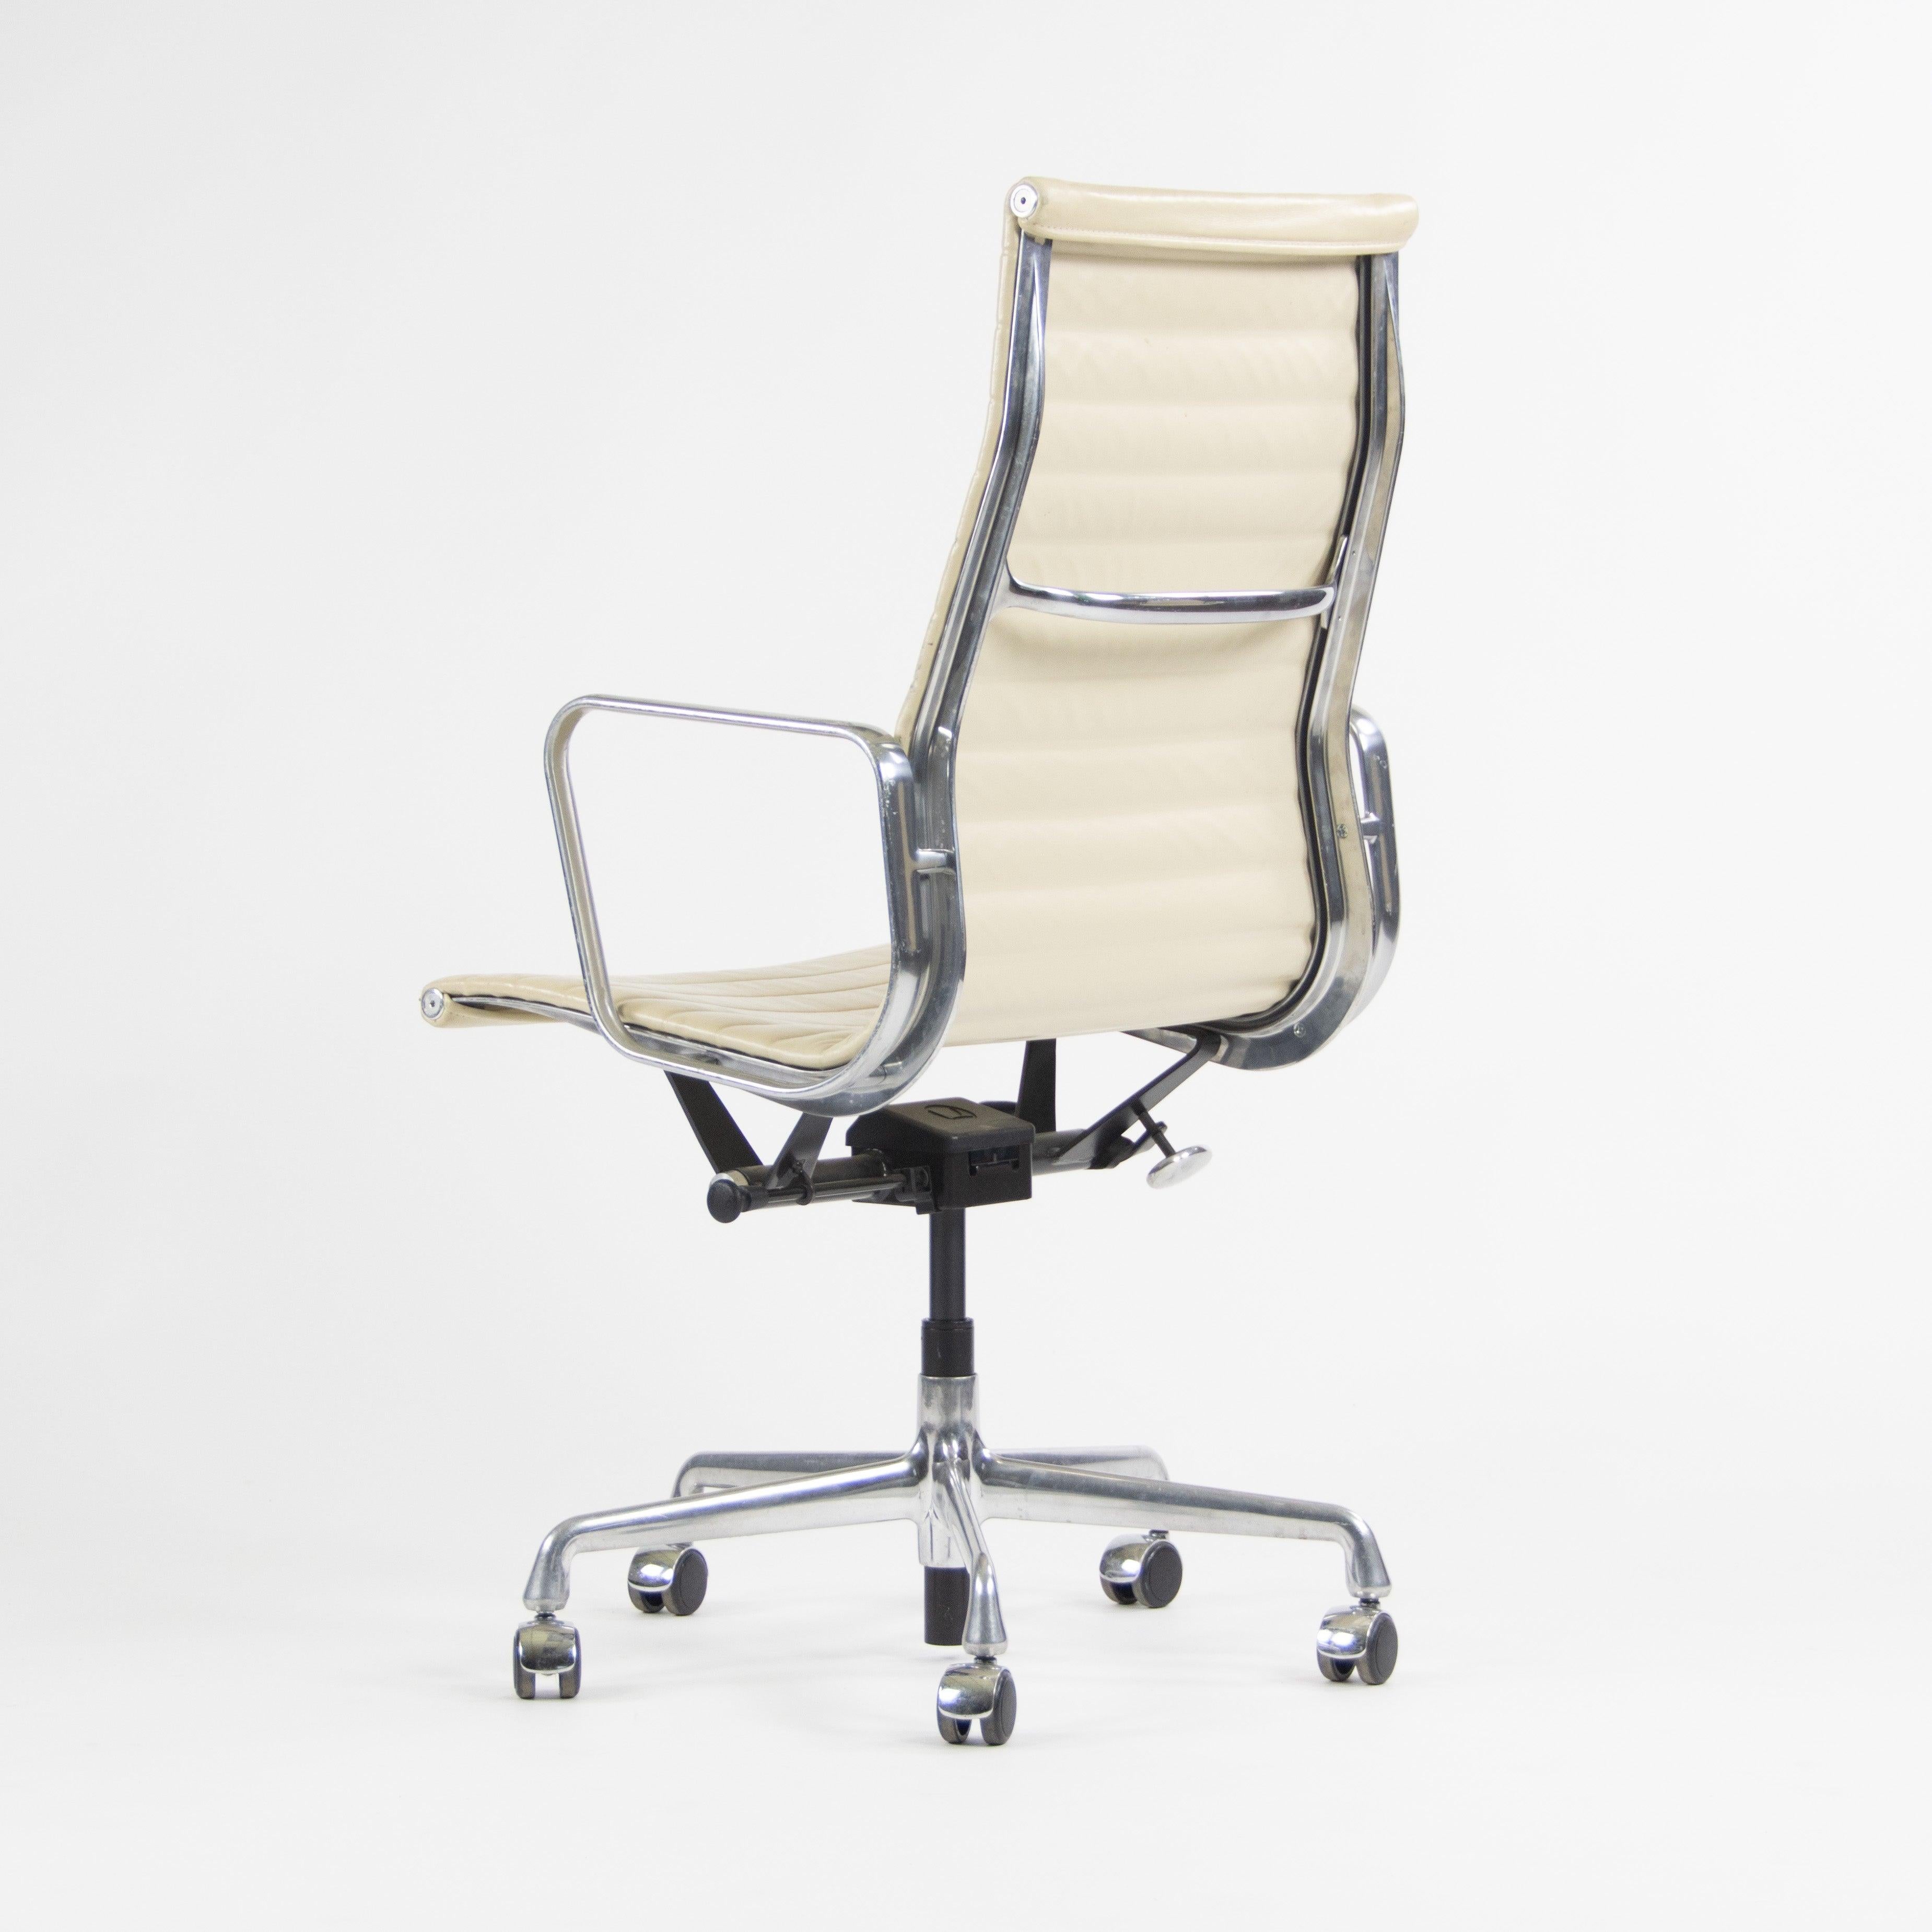 Leather Herman Miller Eames 2011 Executive Aluminum Group Desk Chair 3x Available Ivory For Sale